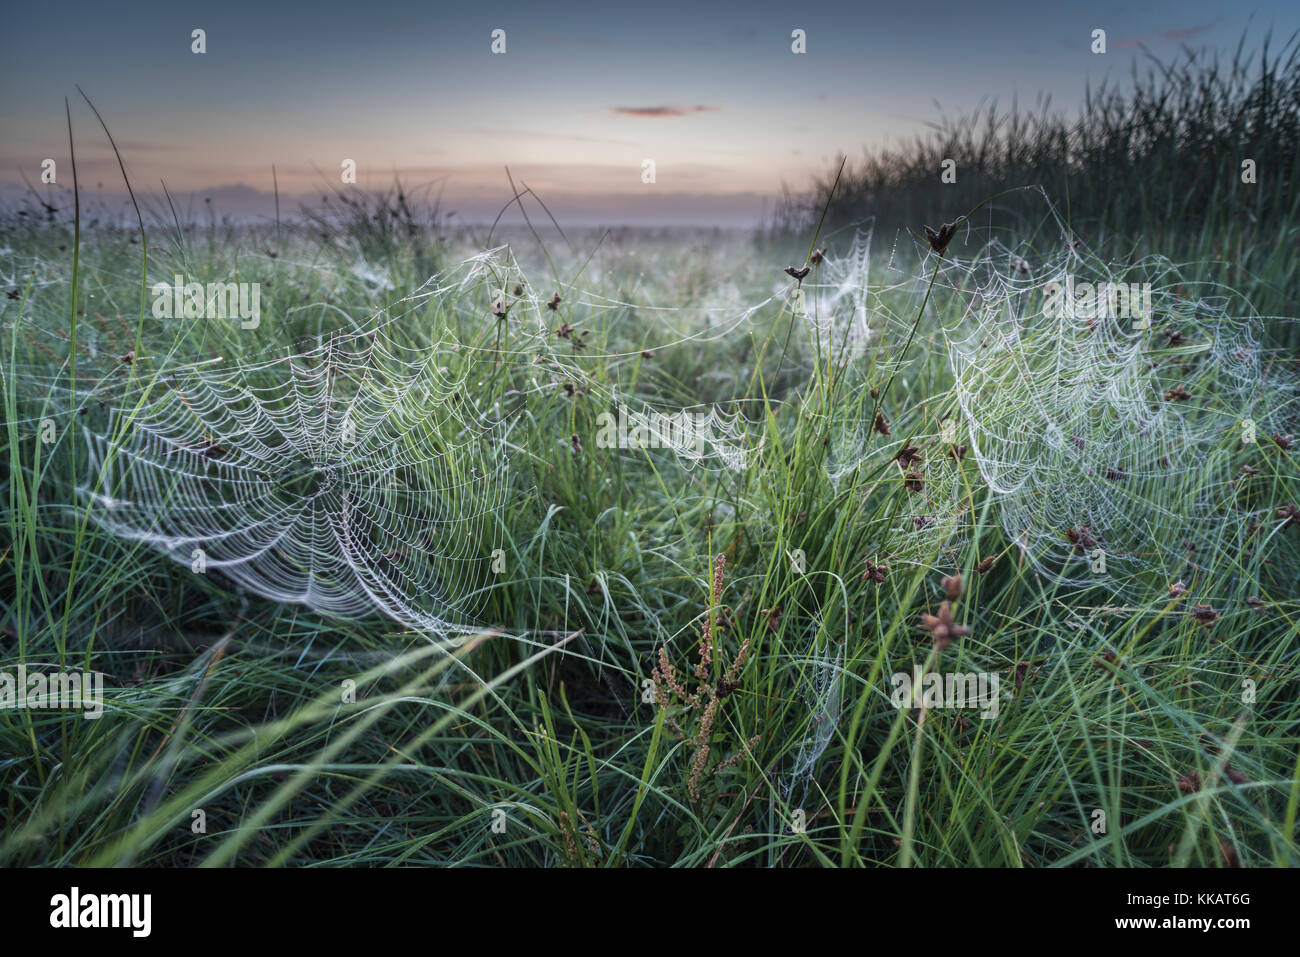 Dew covered orb web in mist at dawn, Elmley Marshes National Nature Reserve, Isle of Sheppey, Kent, England, United Kingdom, Europe Stock Photo